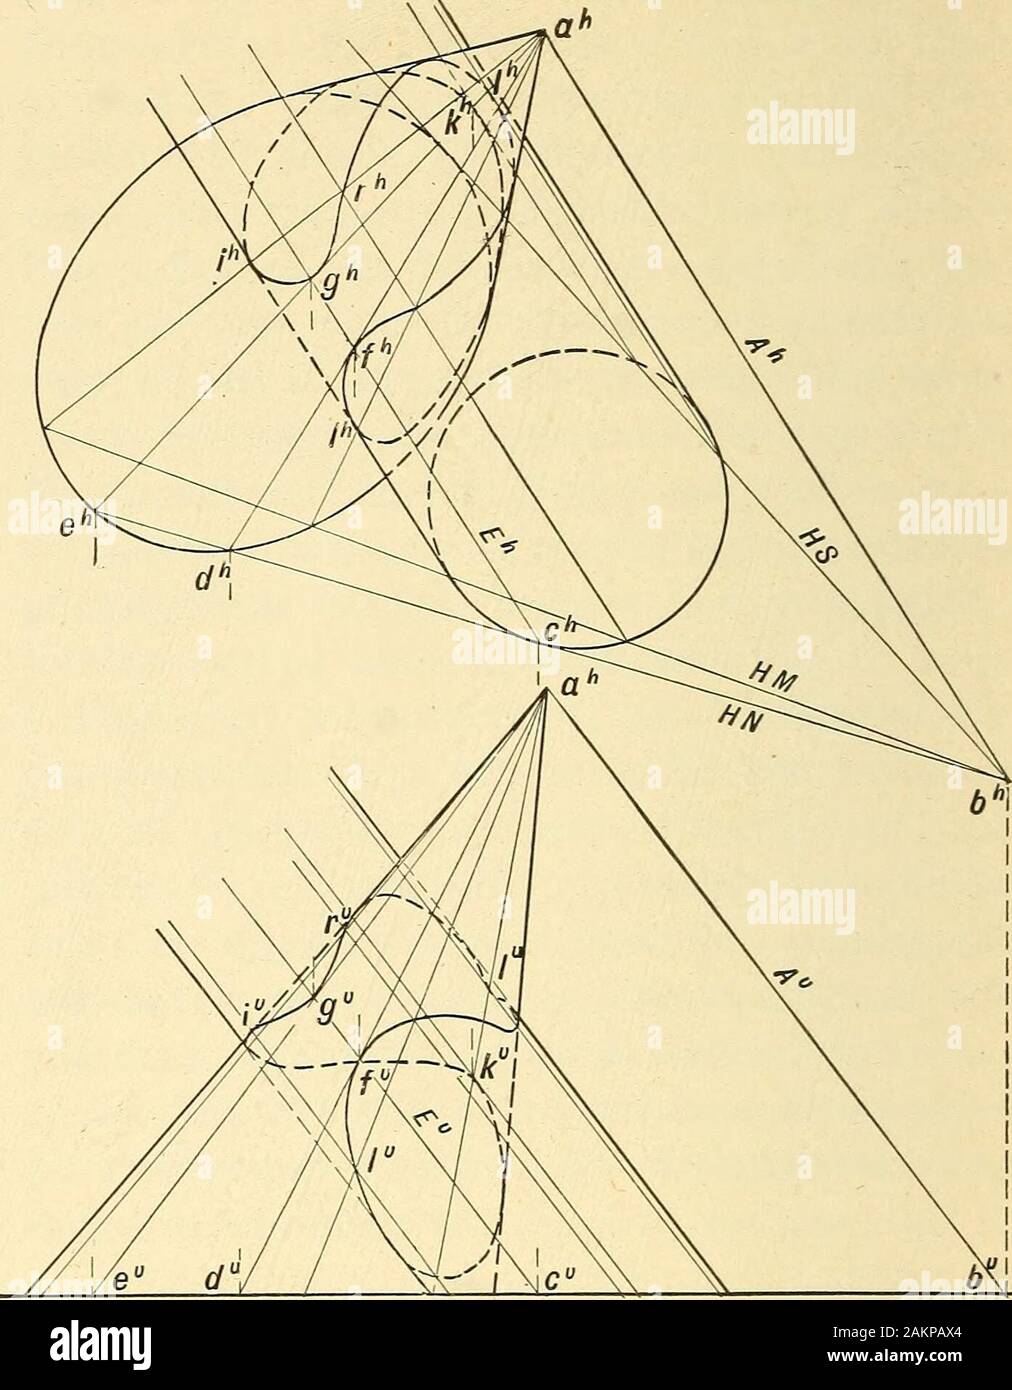 Descriptive geometry . lements, of the cylinder. This linewill be common to all auxiliary cutting planes,and its horizontal trace, b will be a pointcommon to all their horizontal traces. JTNisone such trace which cuts, or is tangent to,the base of the cylinder at t?^ and cuts thebase of the cone in d^ and e Since these arepoints in elements cut from the cylinder andcone by the auxiliary plane iV, the horizontaland vertical projections of the elements maybe drawn. Line U will be the element cutfrom the cylinder, while da and ea are tlieelements cut from the cone. The intersectionof these elem Stock Photo